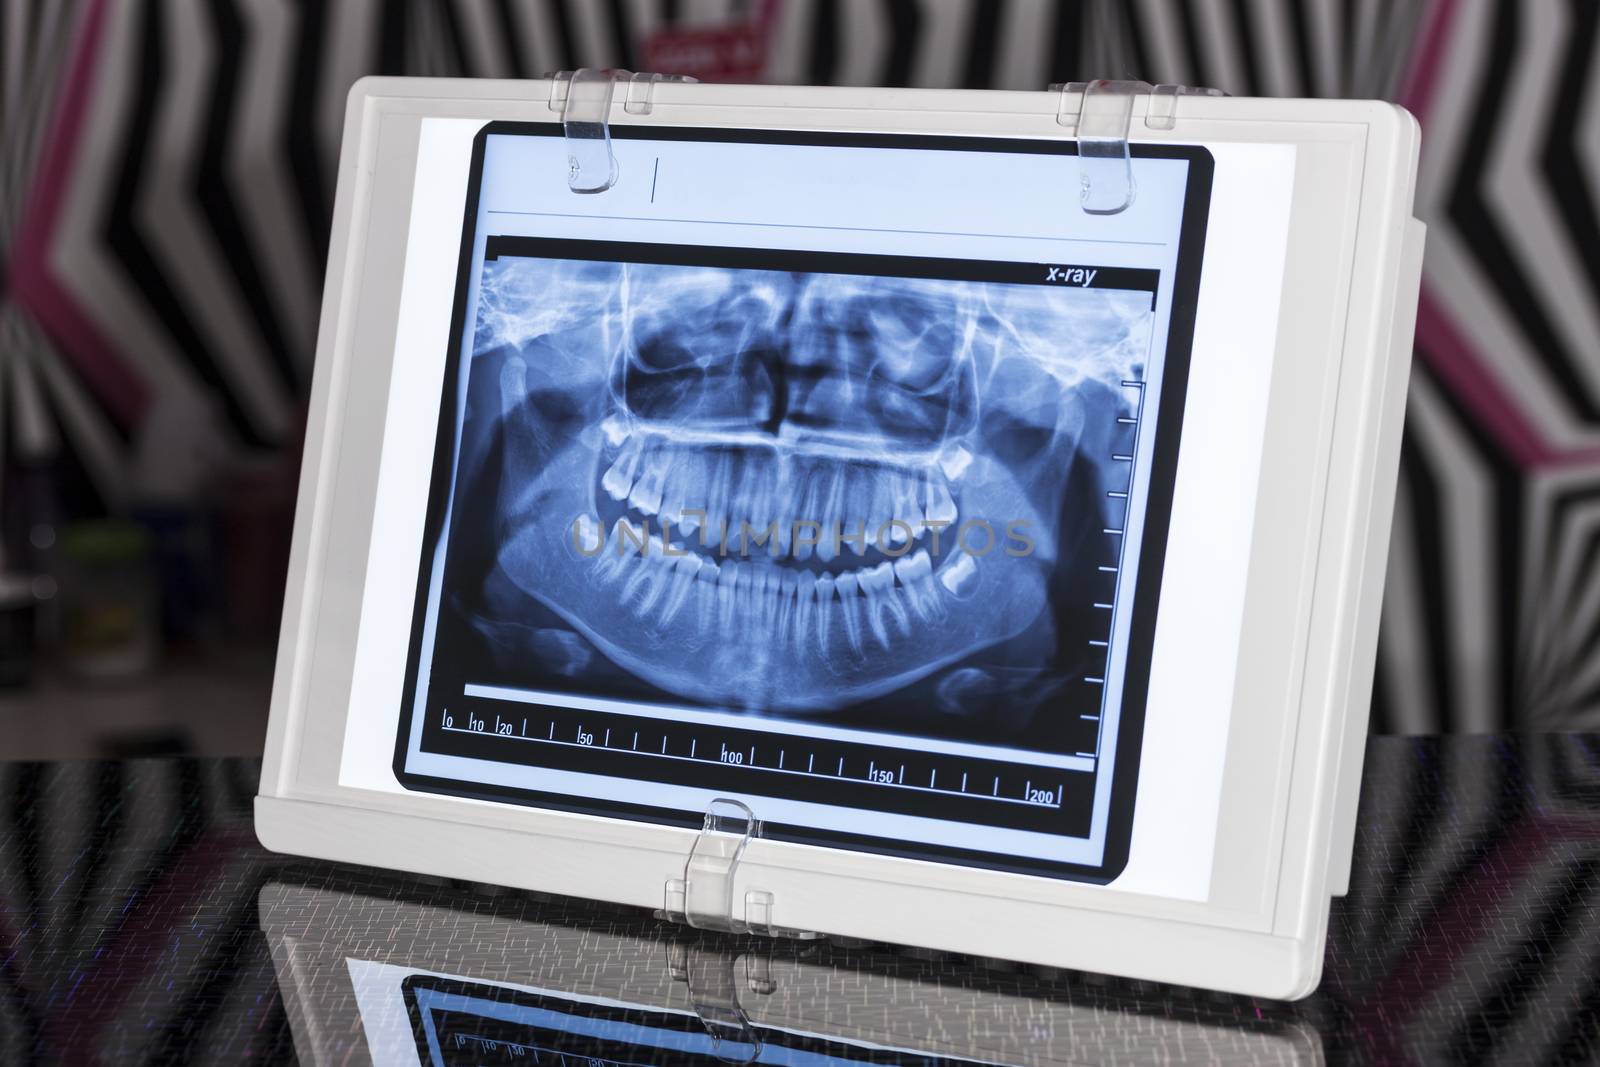 Dental Panoramic x-ray in Viewer with Reflectin